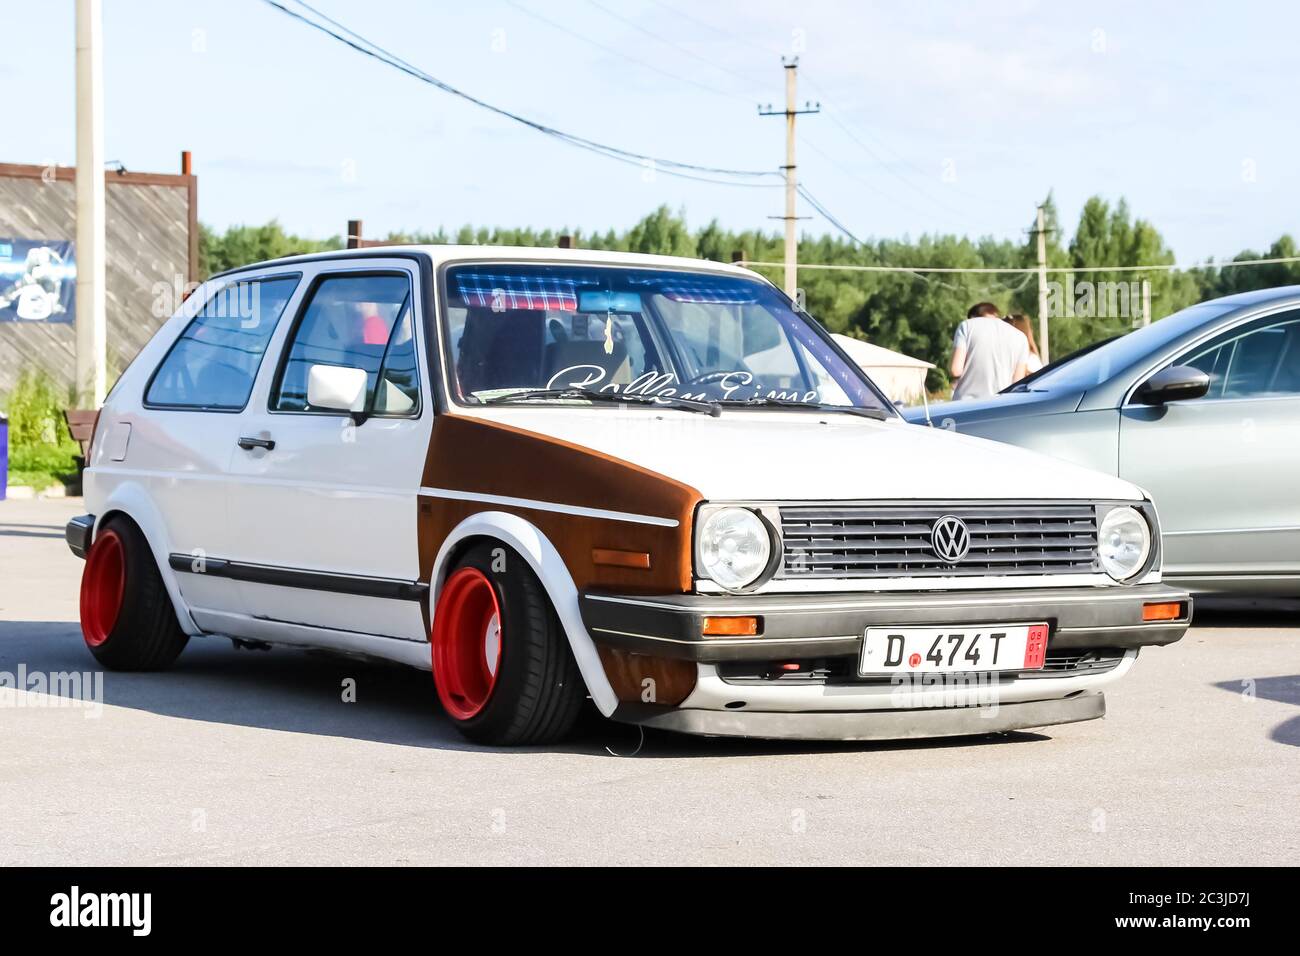 Moscow. Russia - May 20, 2019: White tuned in Stance style Volkswagen Golf mk 1. Low car with wide red wheels parked on the street. Cult and legendary Stock Photo